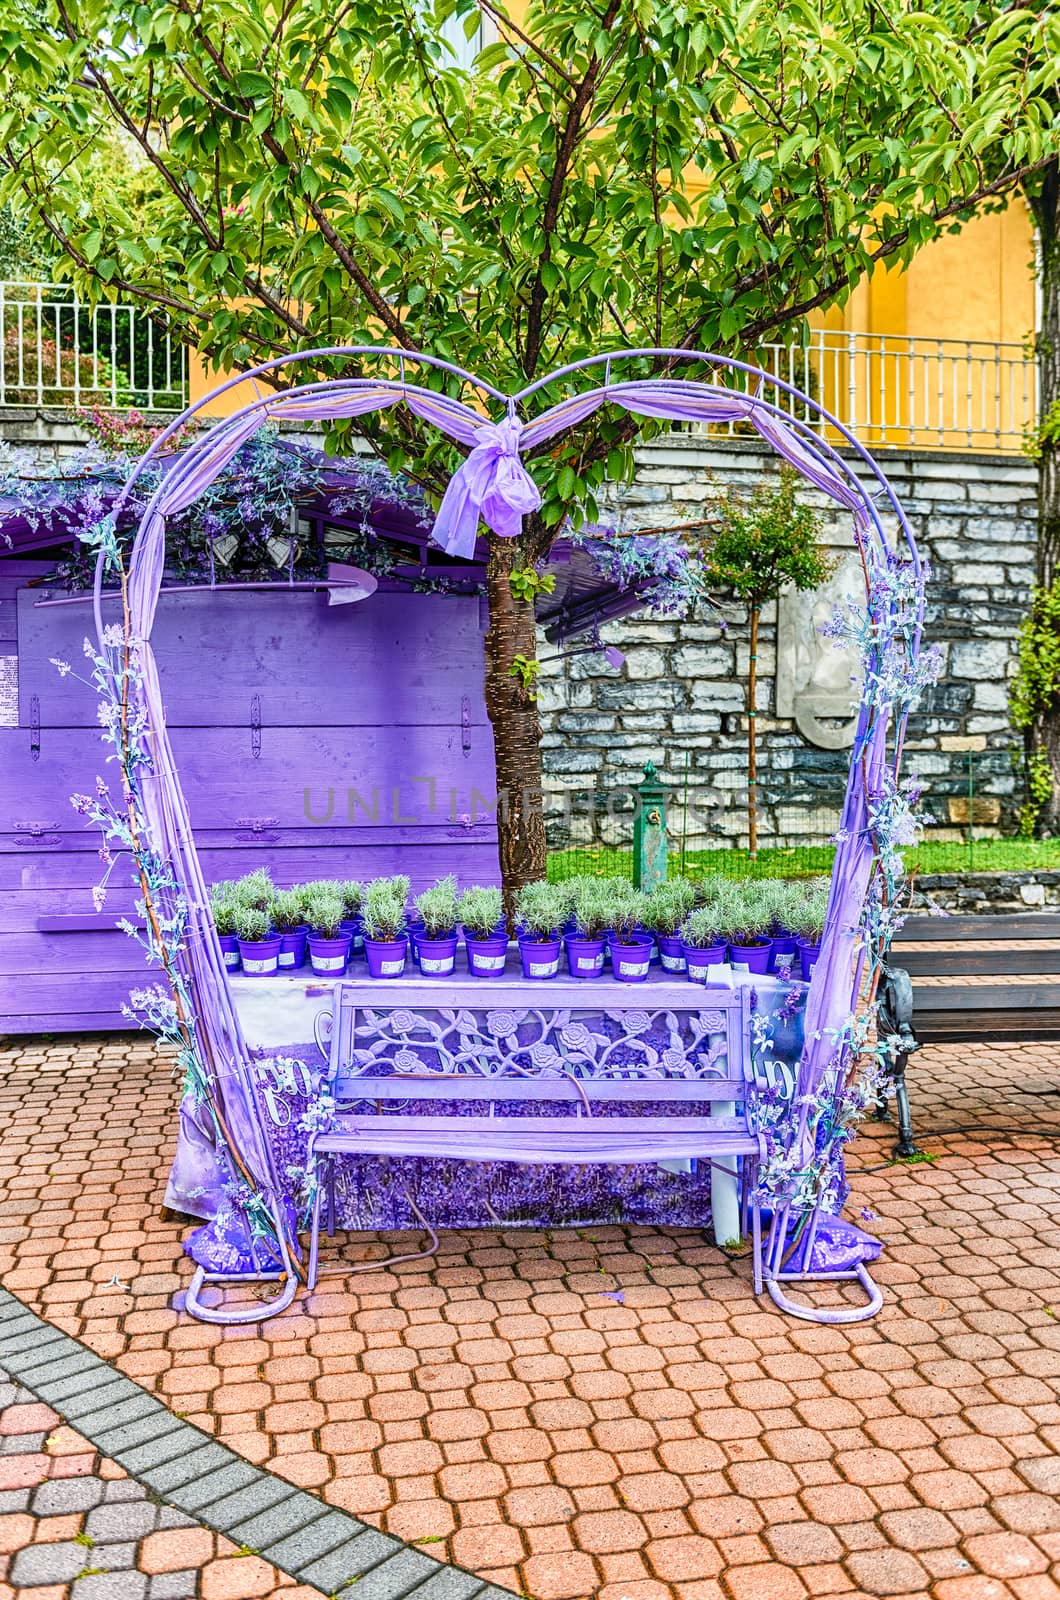 Scenic heart-shaped bench decorated with flowers and laces by marcorubino